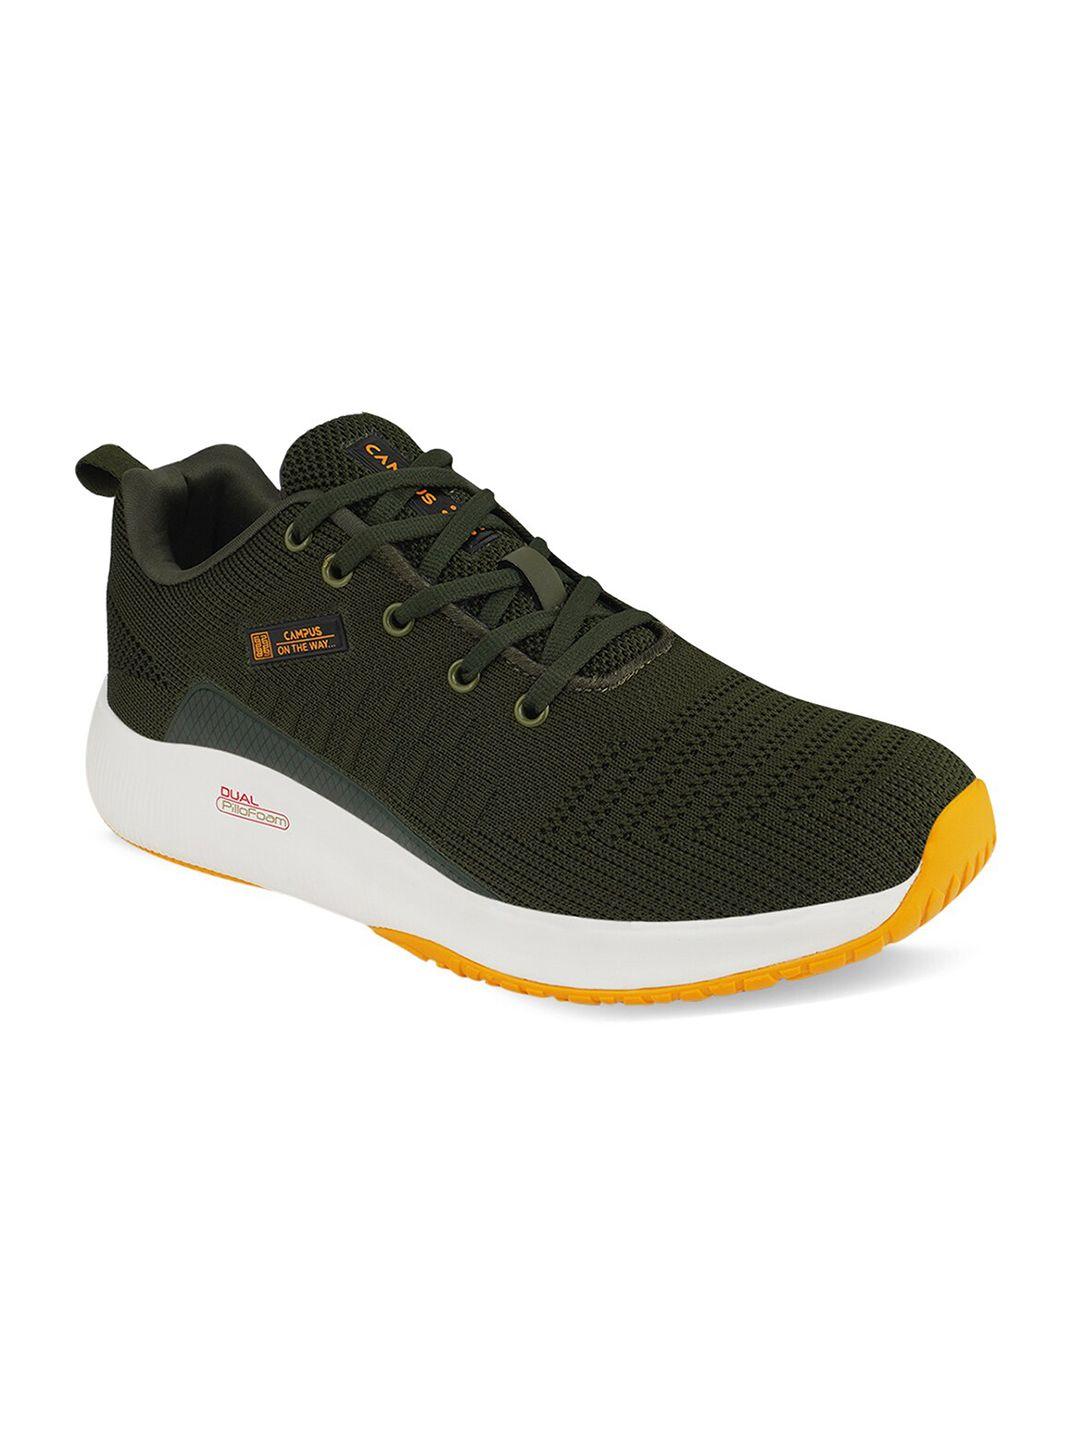 campus men olive green mesh running shoes